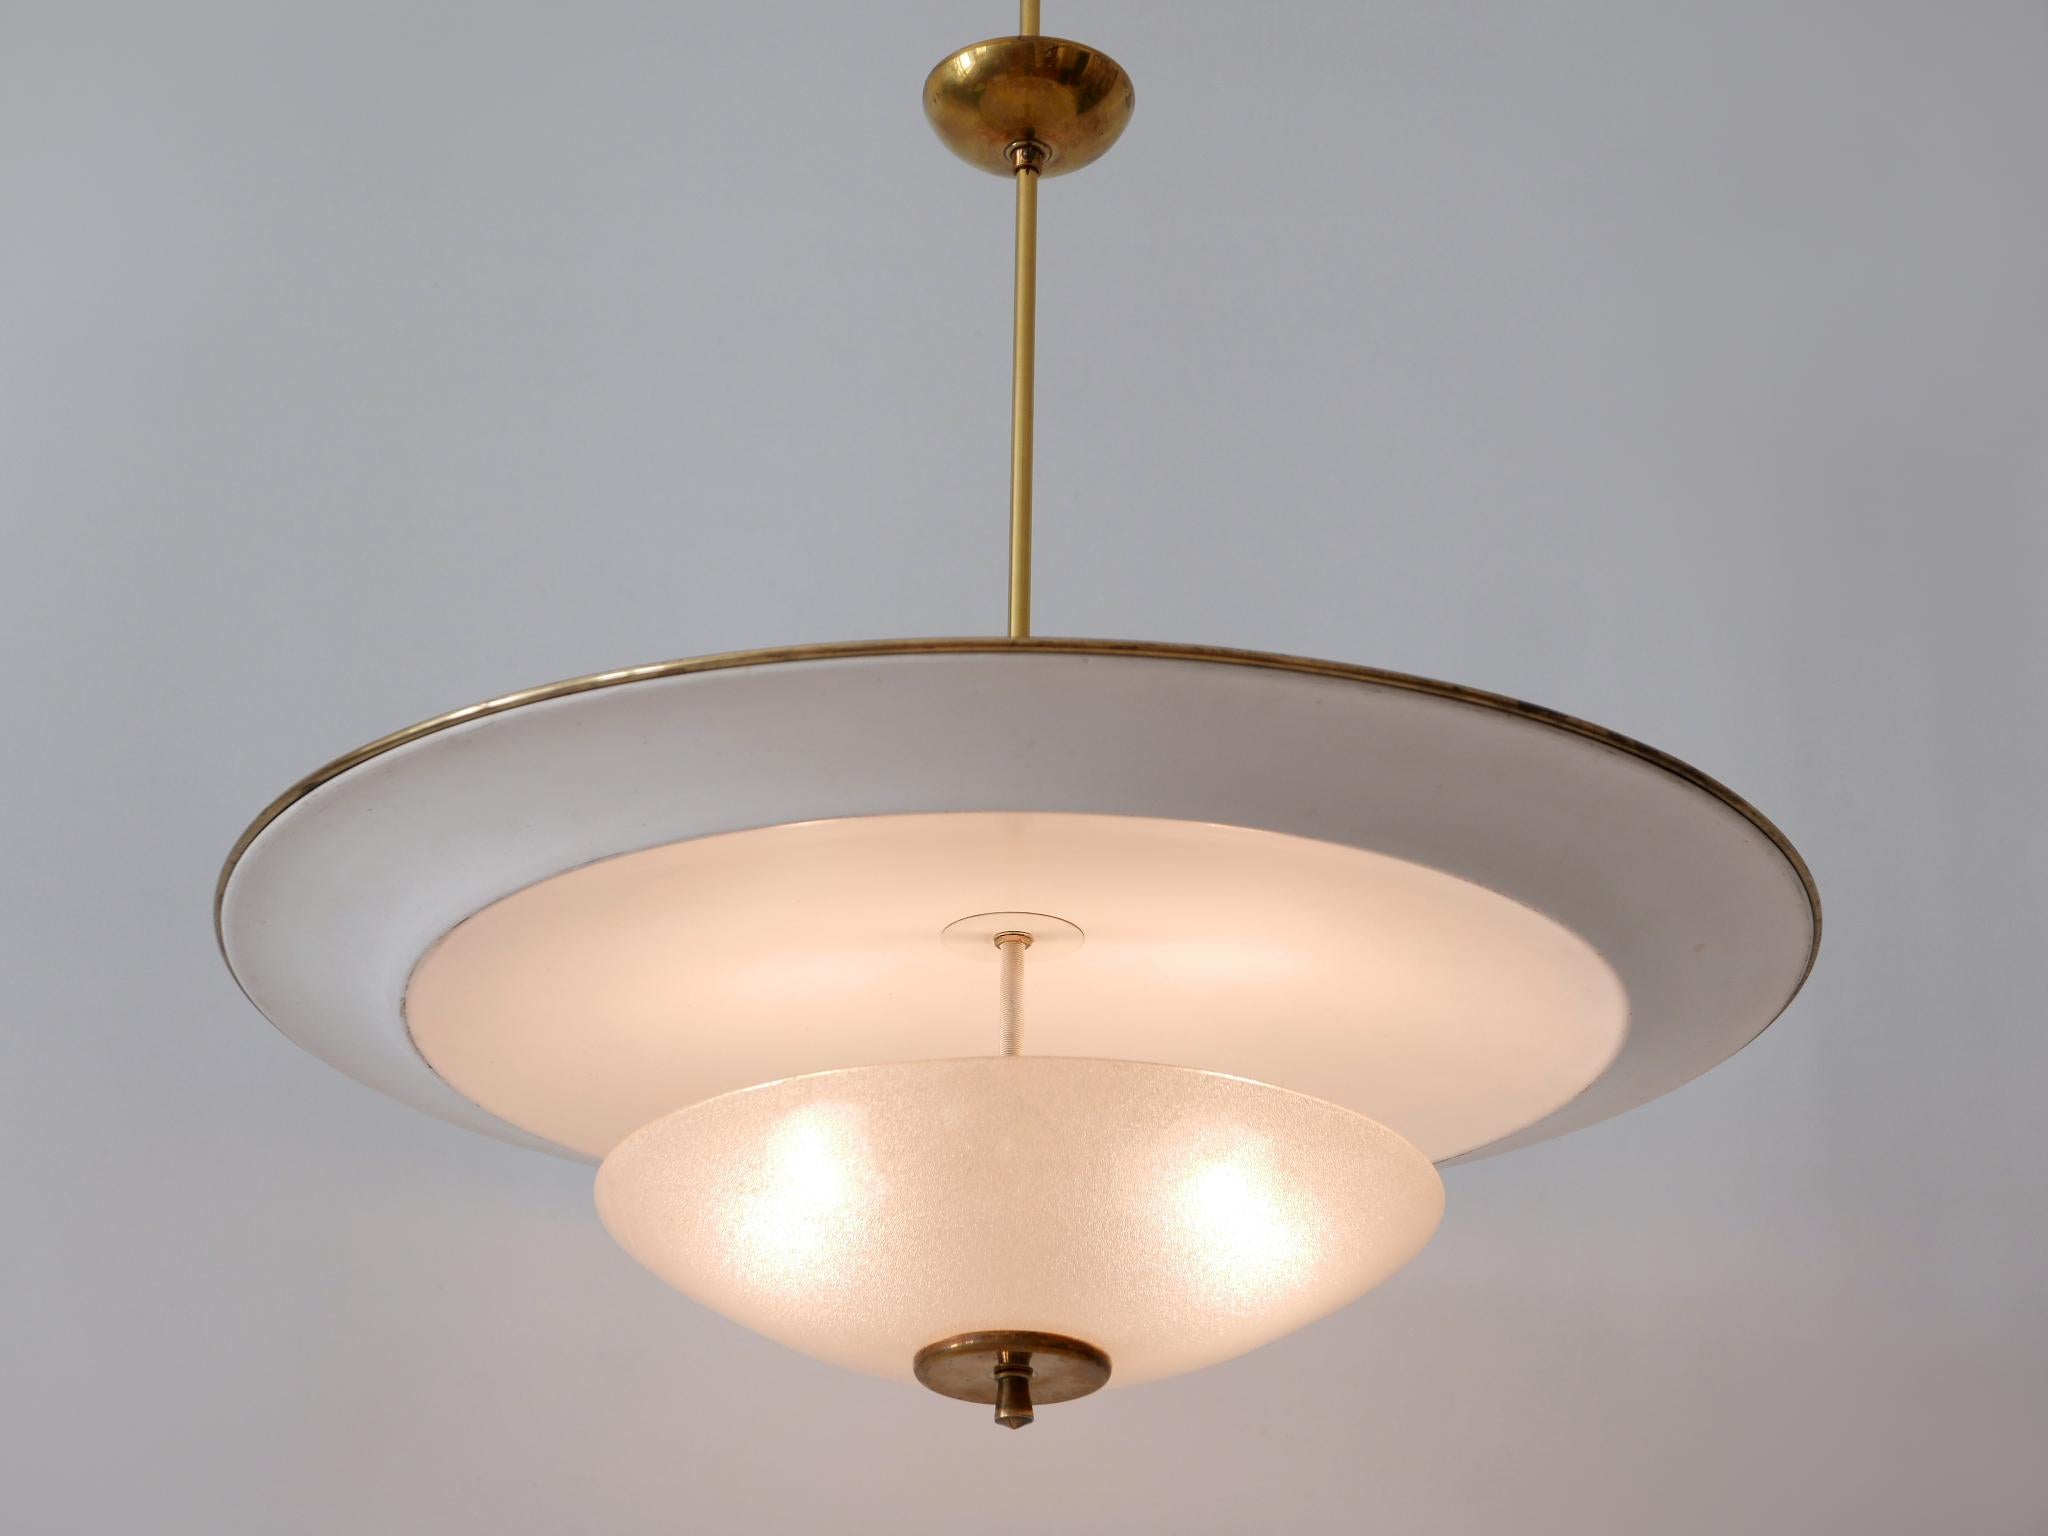 Large Mid-Century Modern 'Ufo' Ceiling Light or Pendant Lamp Germany 1950s № 2 For Sale 7